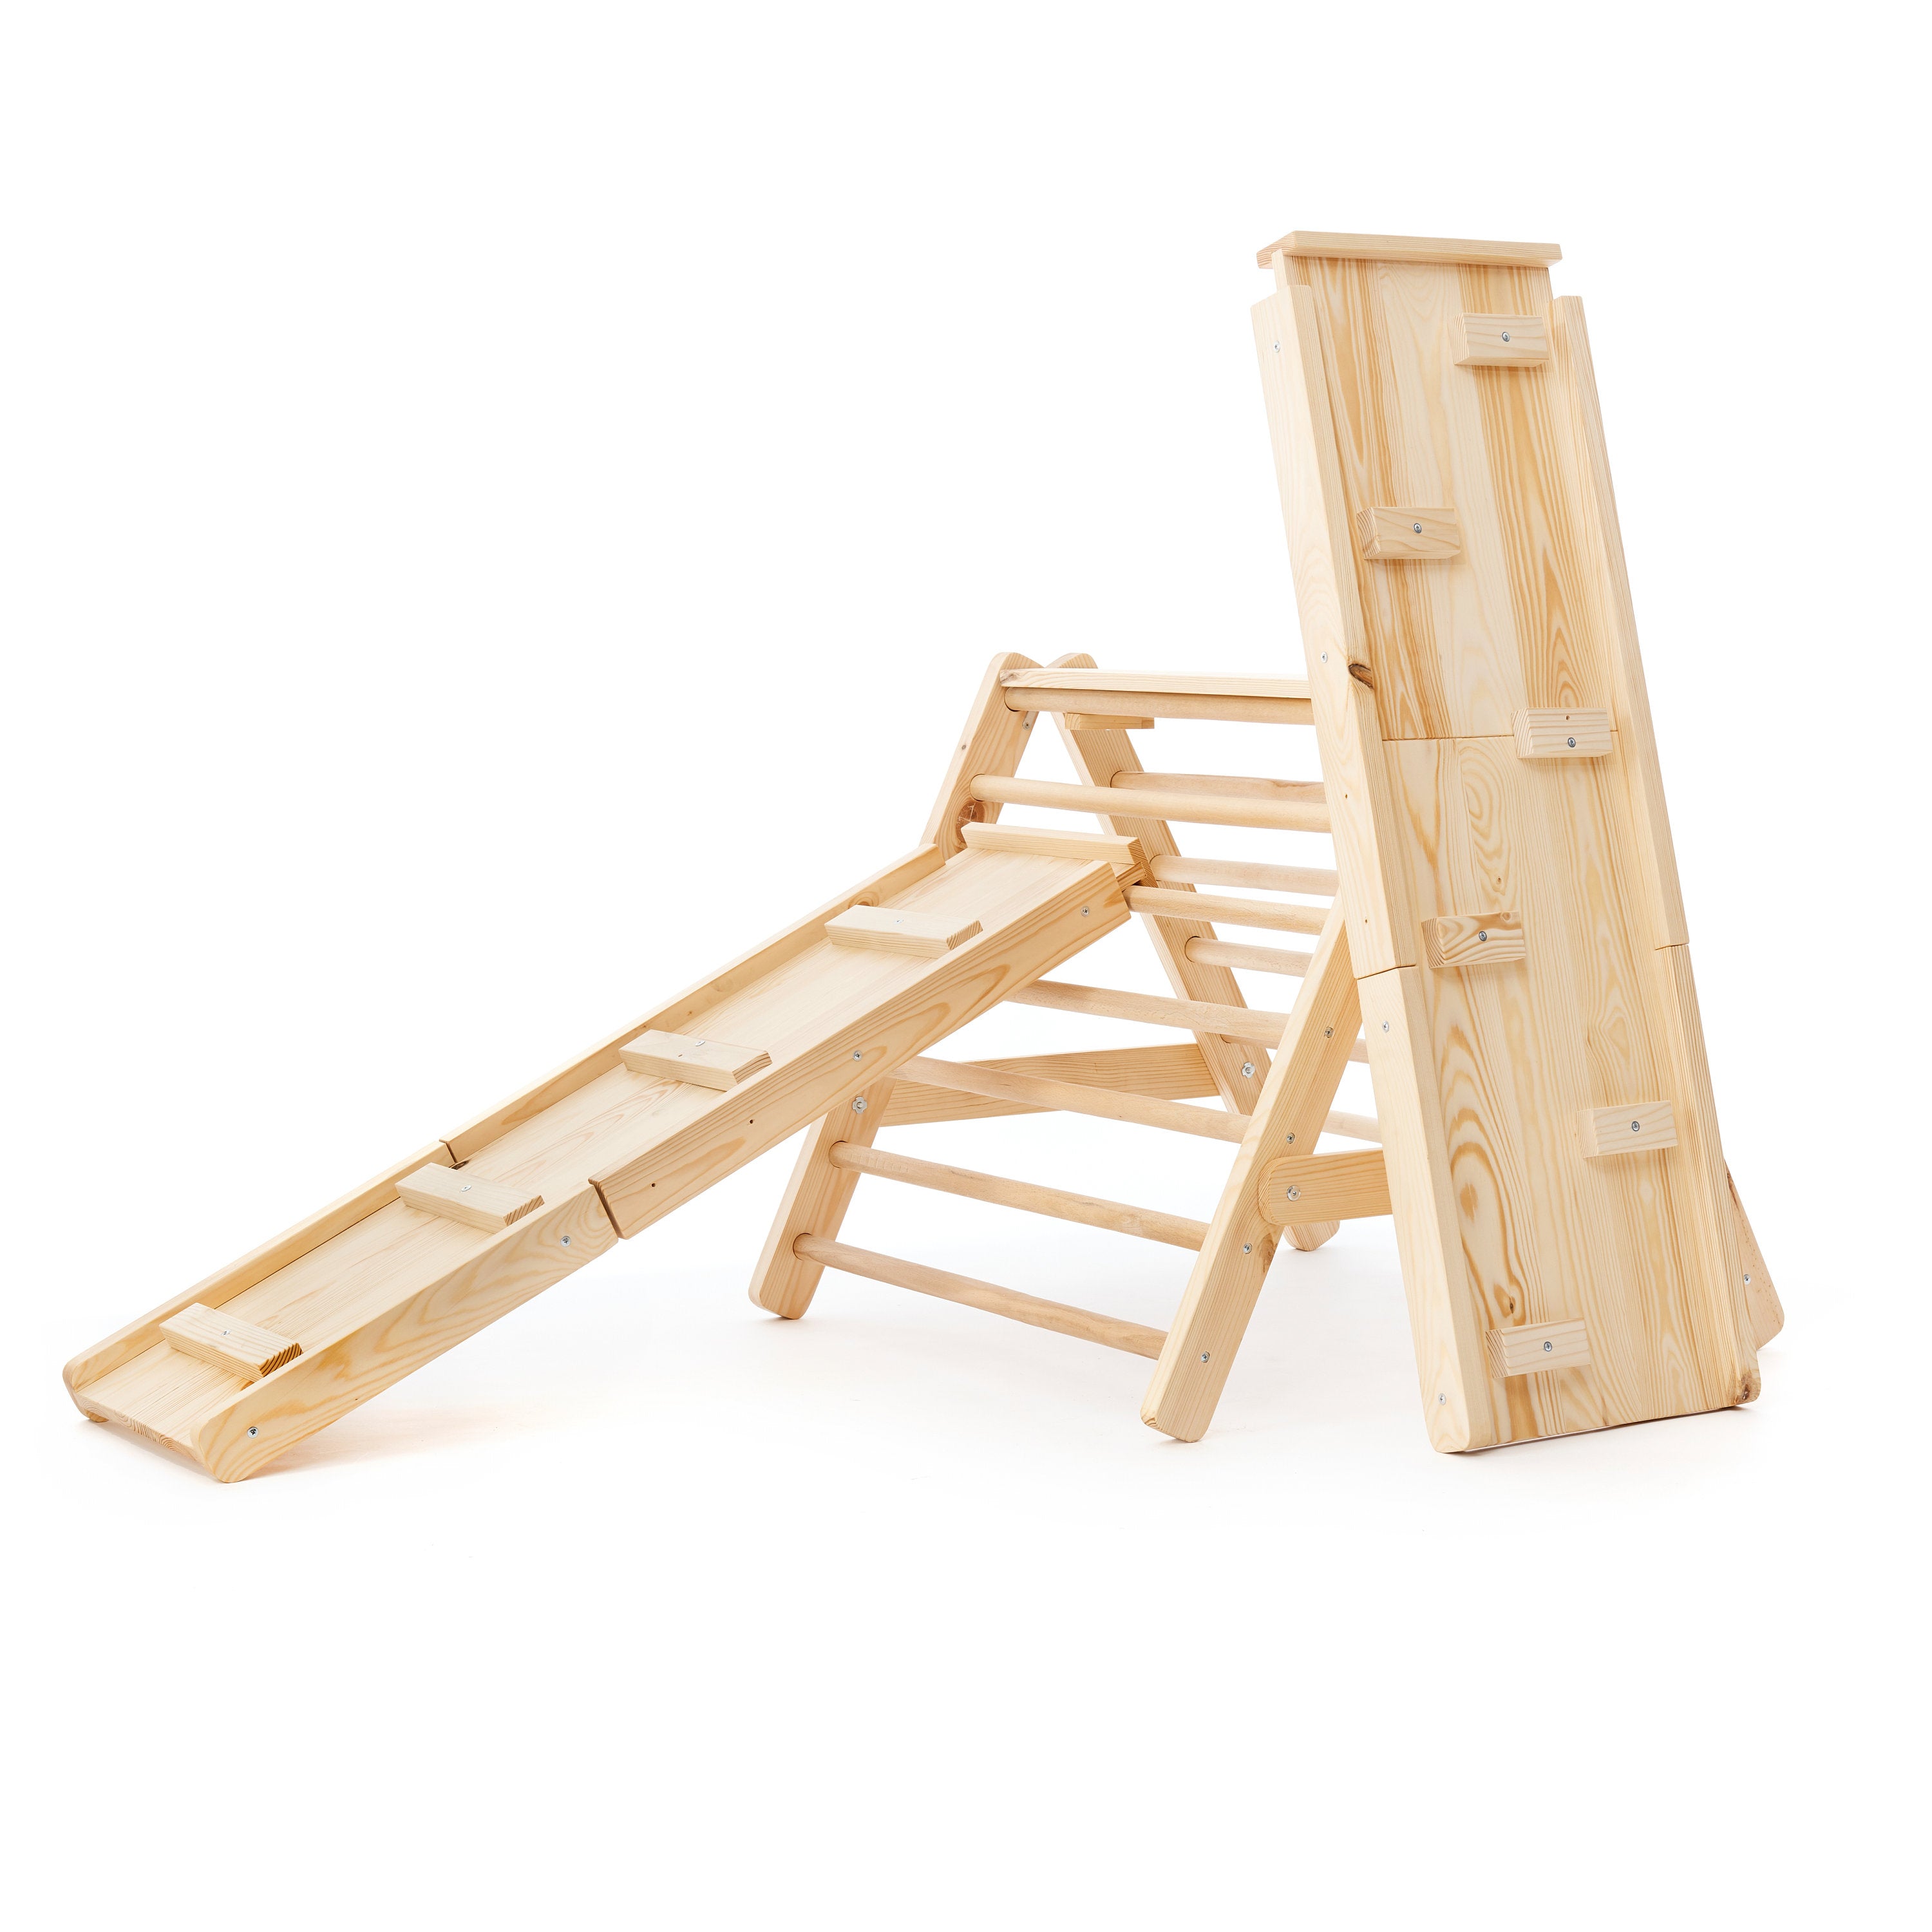 Pikler Step Triangle Climbing Ladder Gym With Two Montessori Ramps For Toddler - Solid Wood Construction